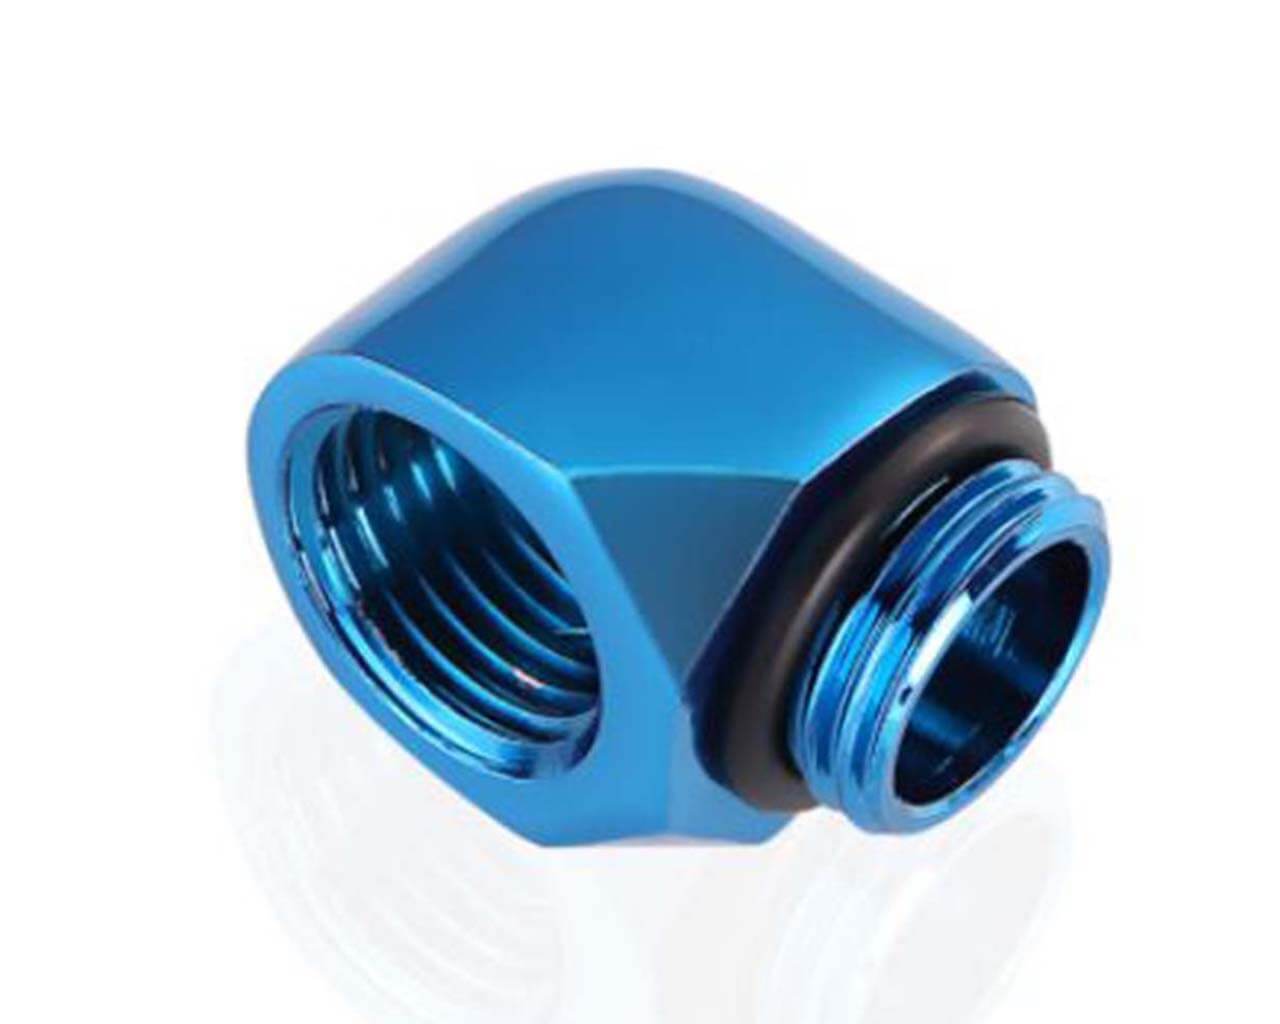 Bykski G1/4 Male to Female 90 Degree Elbow Fitting (B-D90) - PrimoChill - KEEPING IT COOL Blue